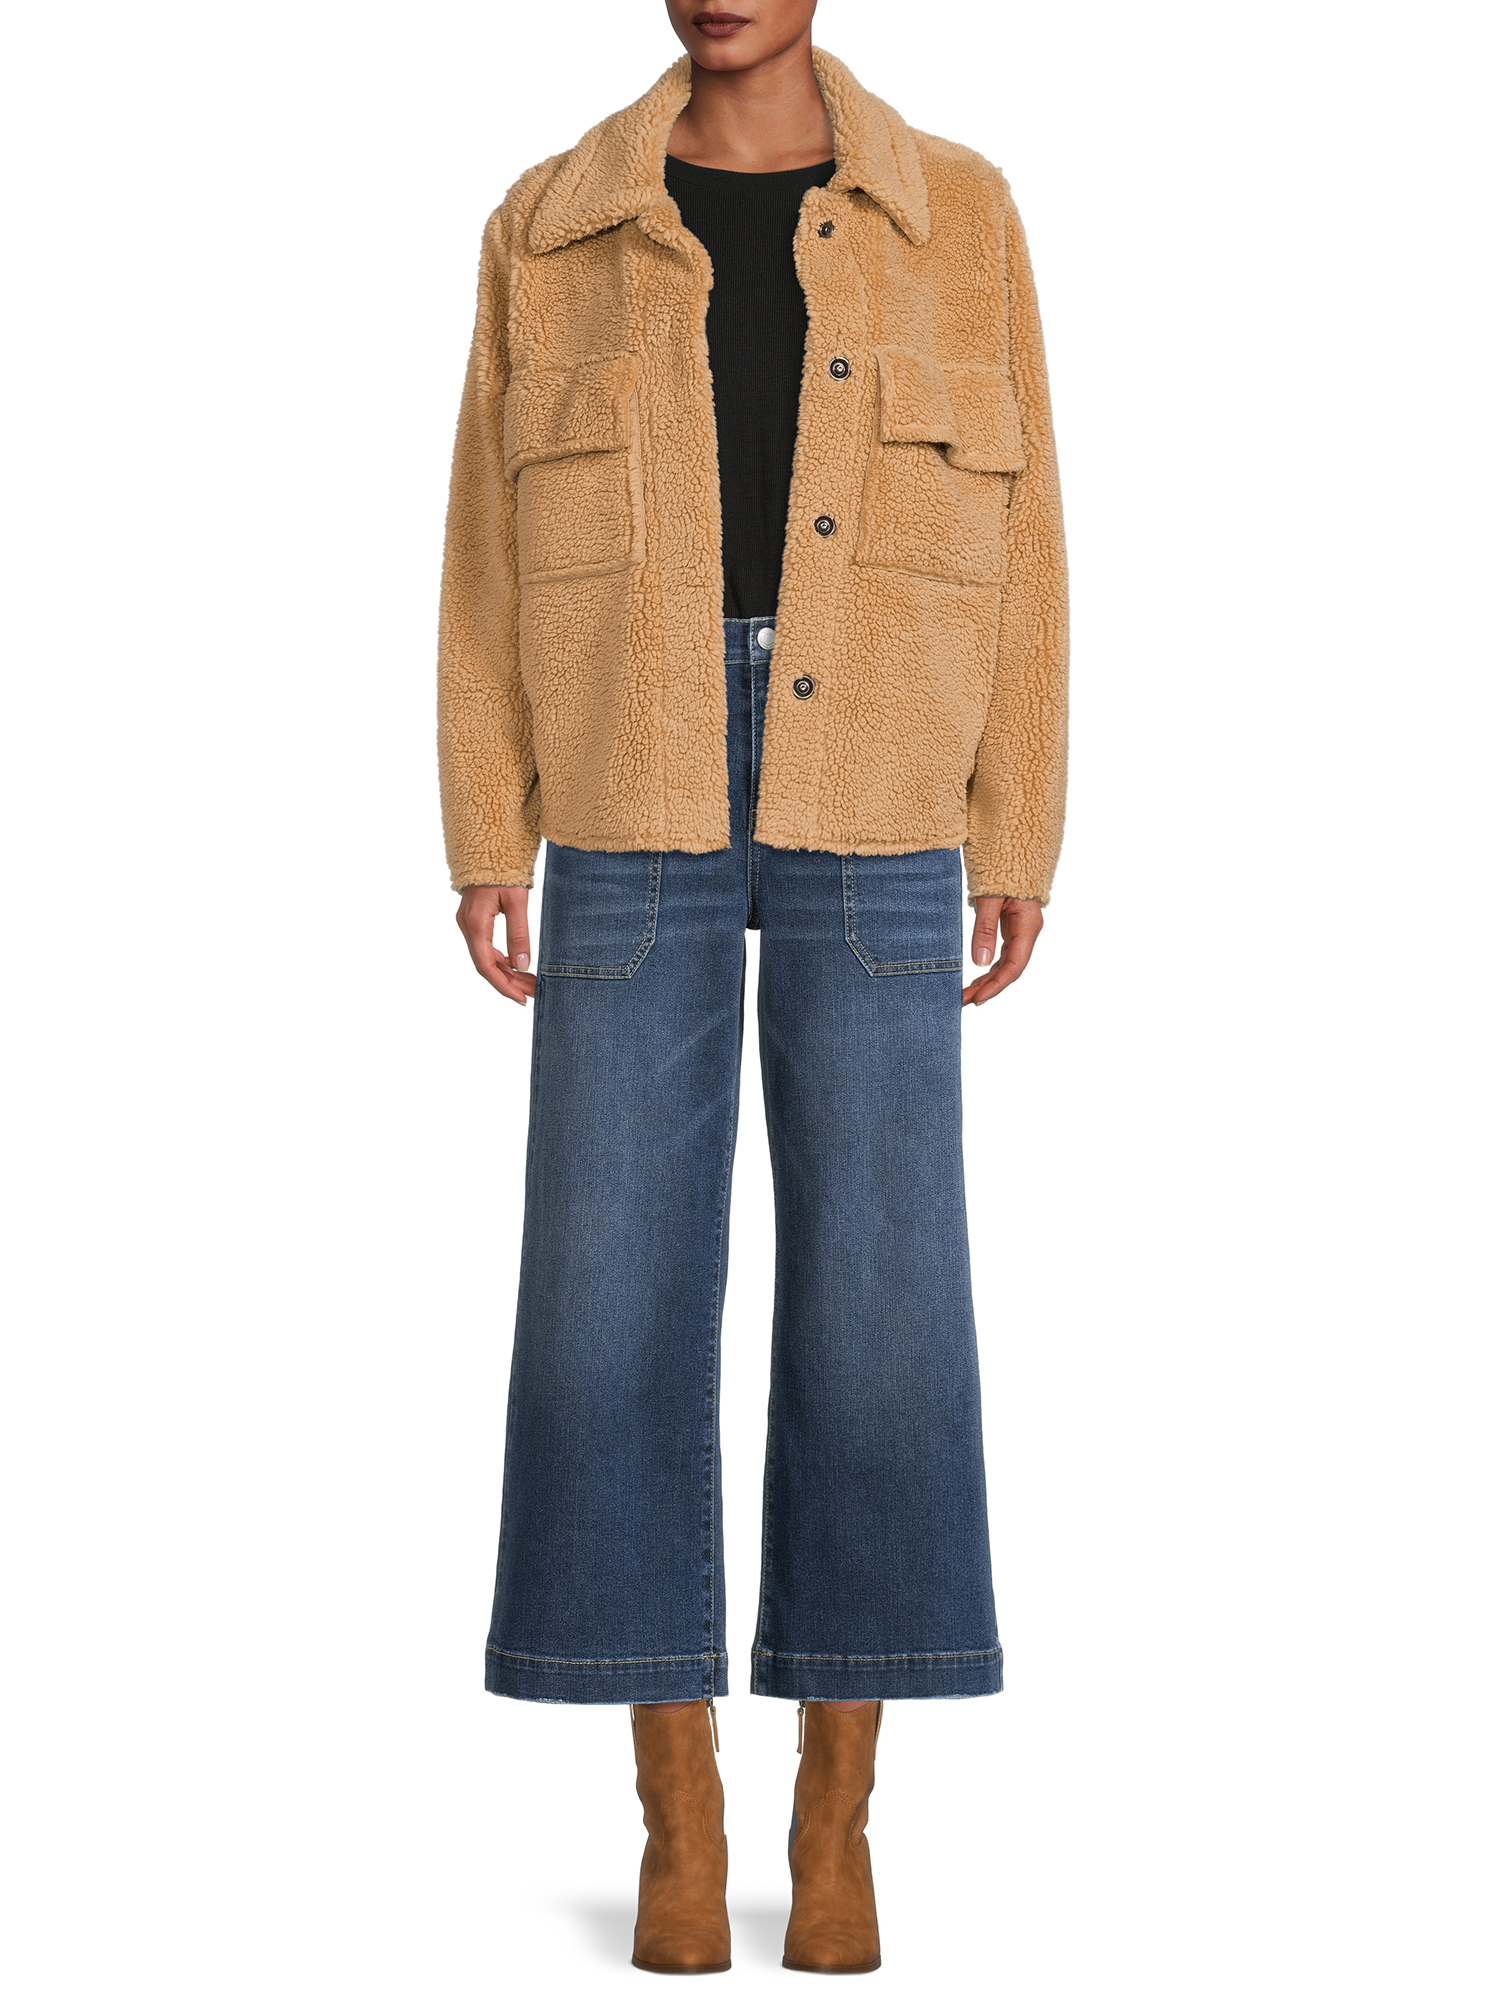 Time and Tru Women's Sherpa Jacket - image 2 of 5